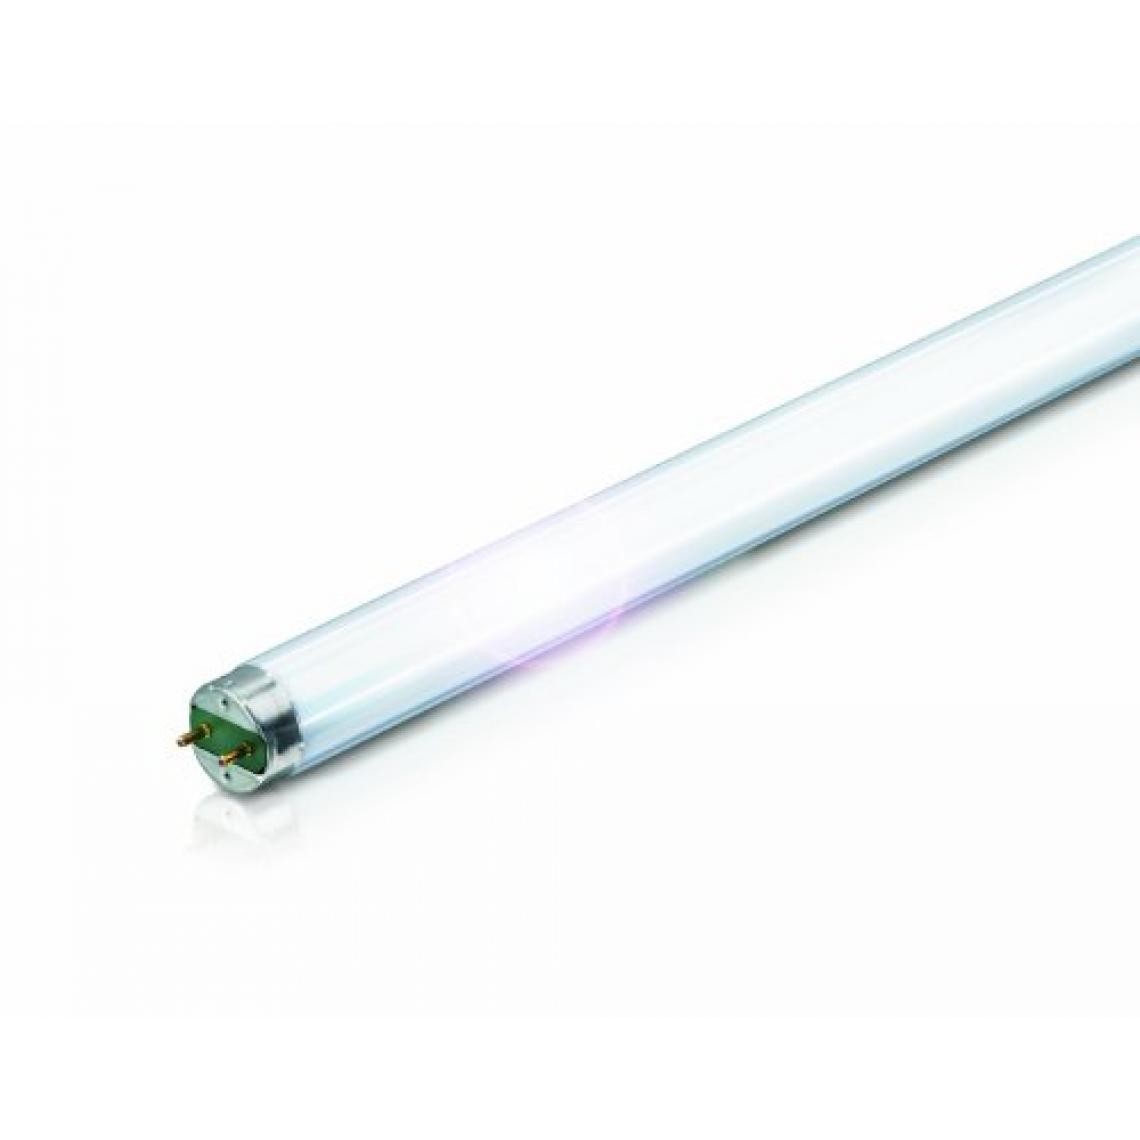 Philips - Philips Ampoule Tube Fluorescent Tube Culot G13 30 Watts - Eclairage solaire